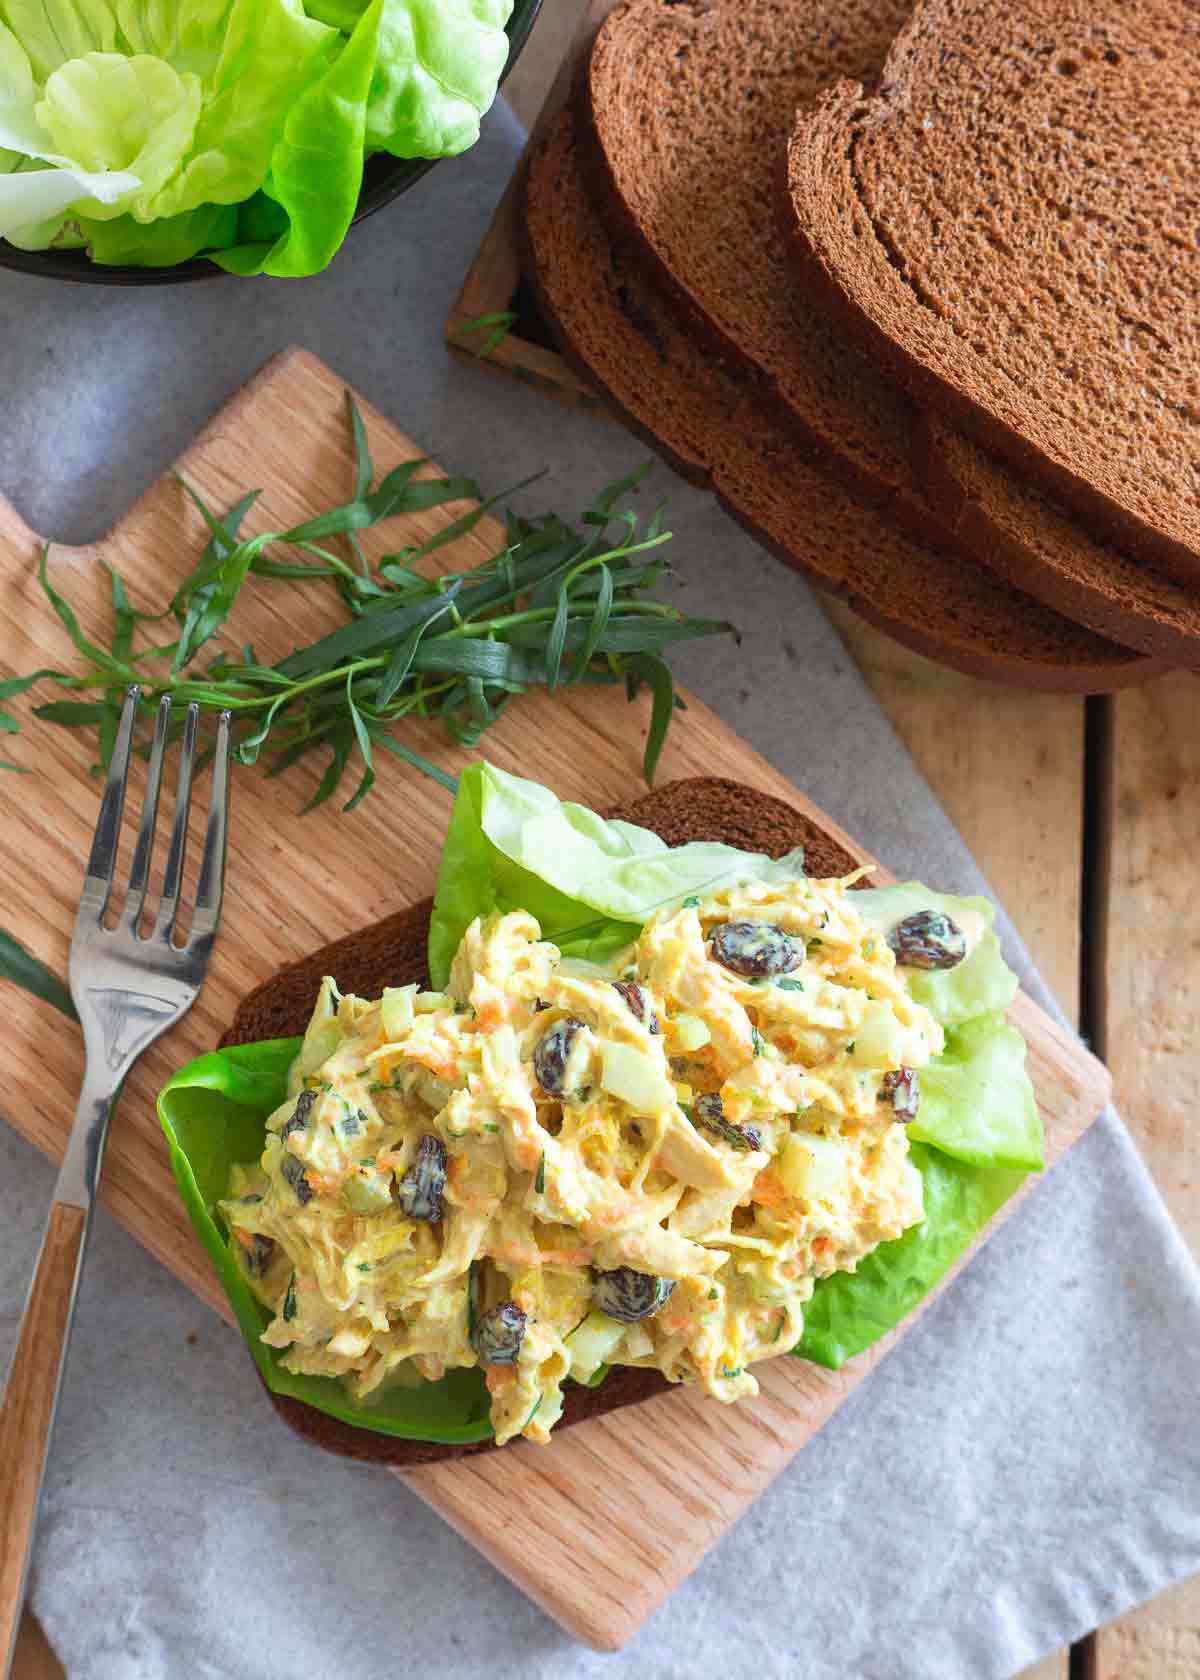 Fresh turmeric and tarragon flavor this easy chicken salad lunch recipe.